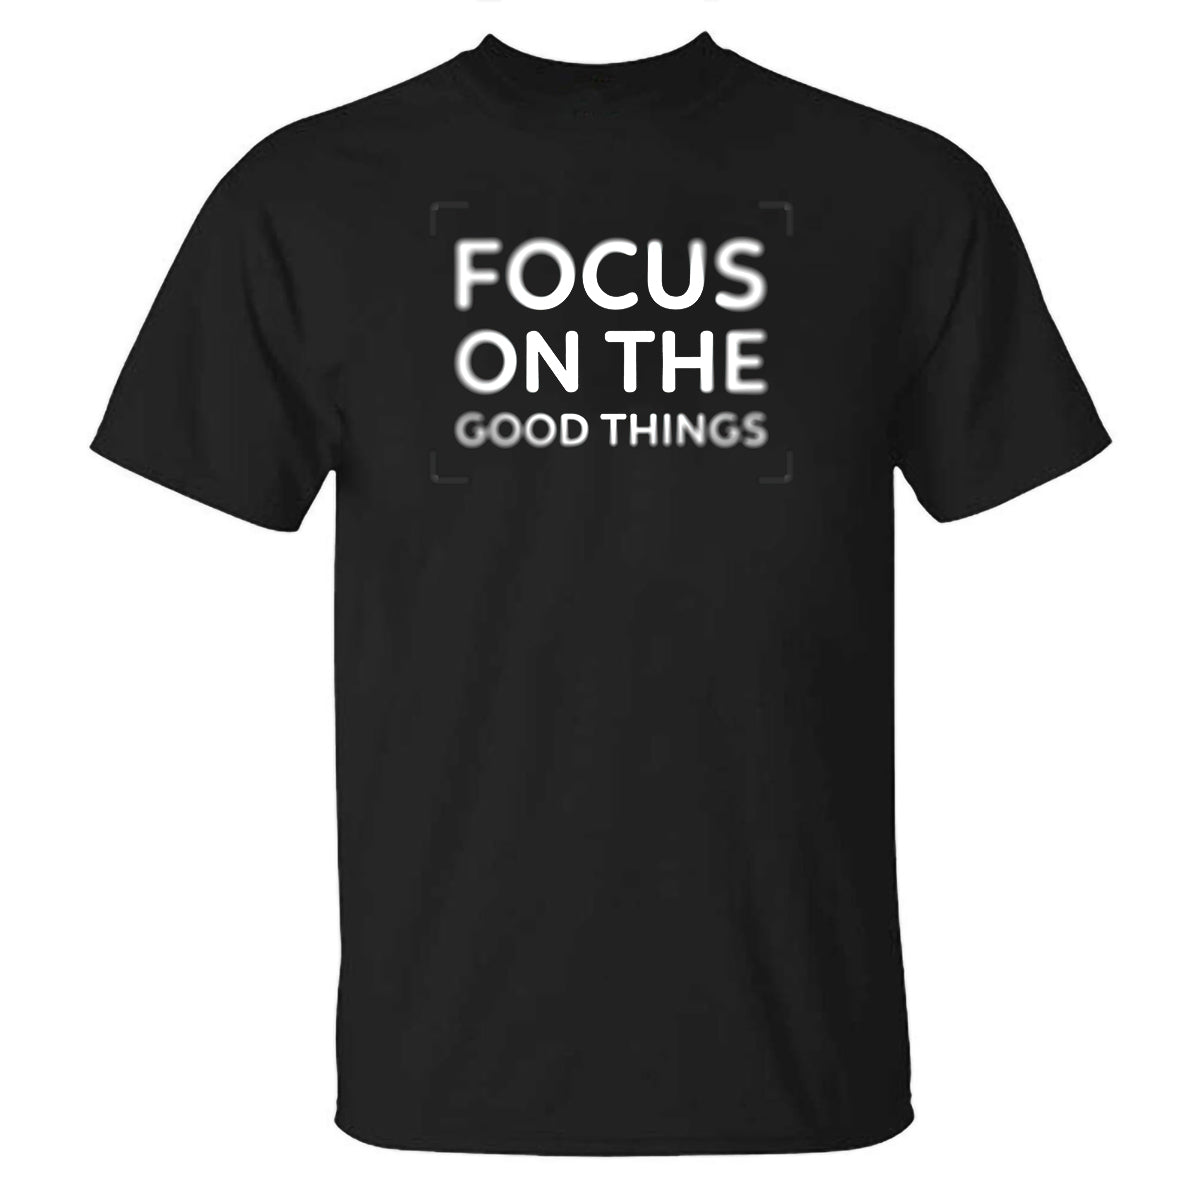 Focus On The Good Things Printed Men's T-shirt